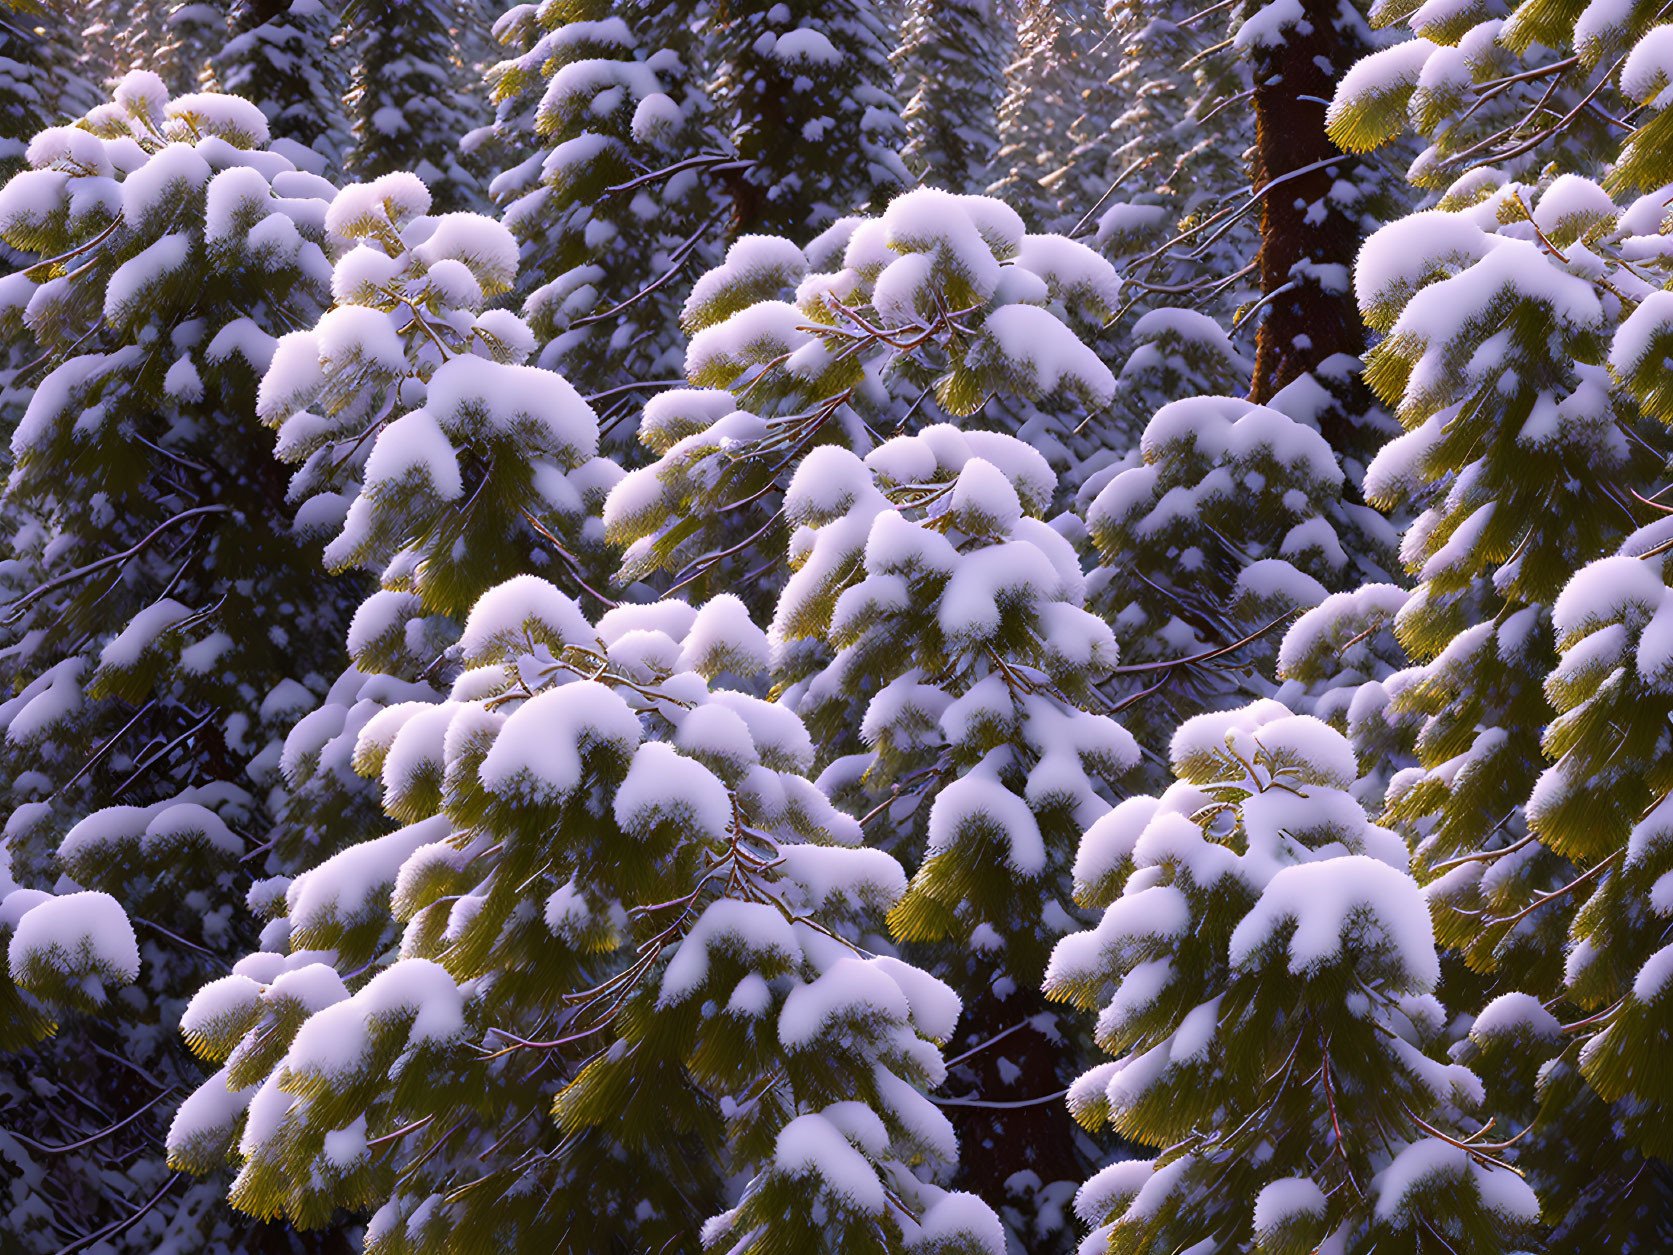 Snow-covered pine trees in sunlight amid shaded forest landscape